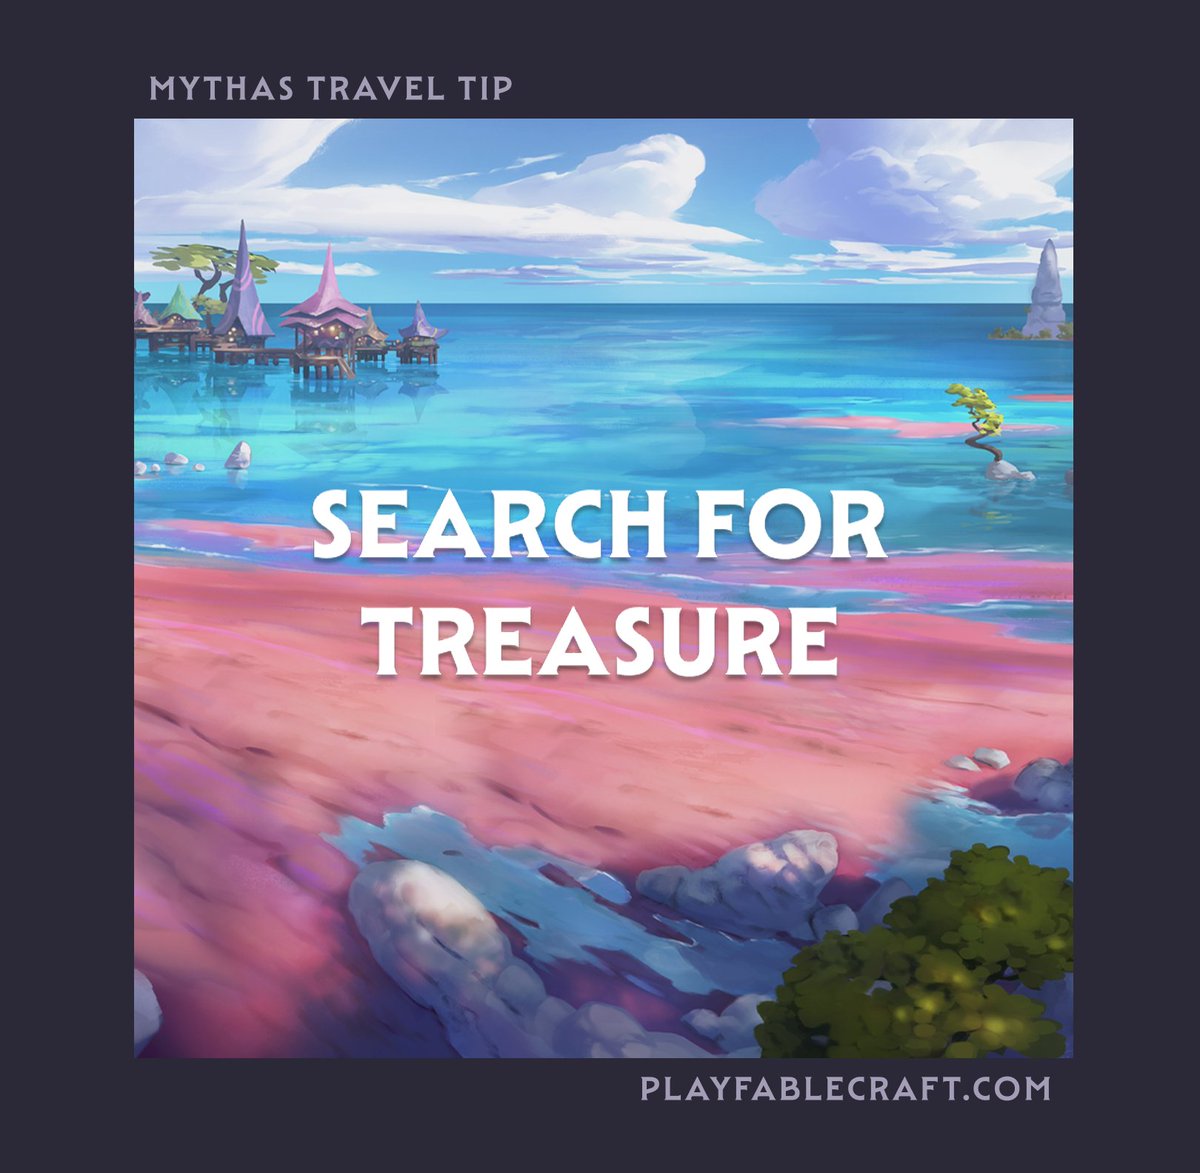 The Coral Coast beaches are a popular destination for treasure hunters and antiques dealers, who come in search of the mysterious treasures that wash up on shore. ✨👀 #TravelTipTuesday